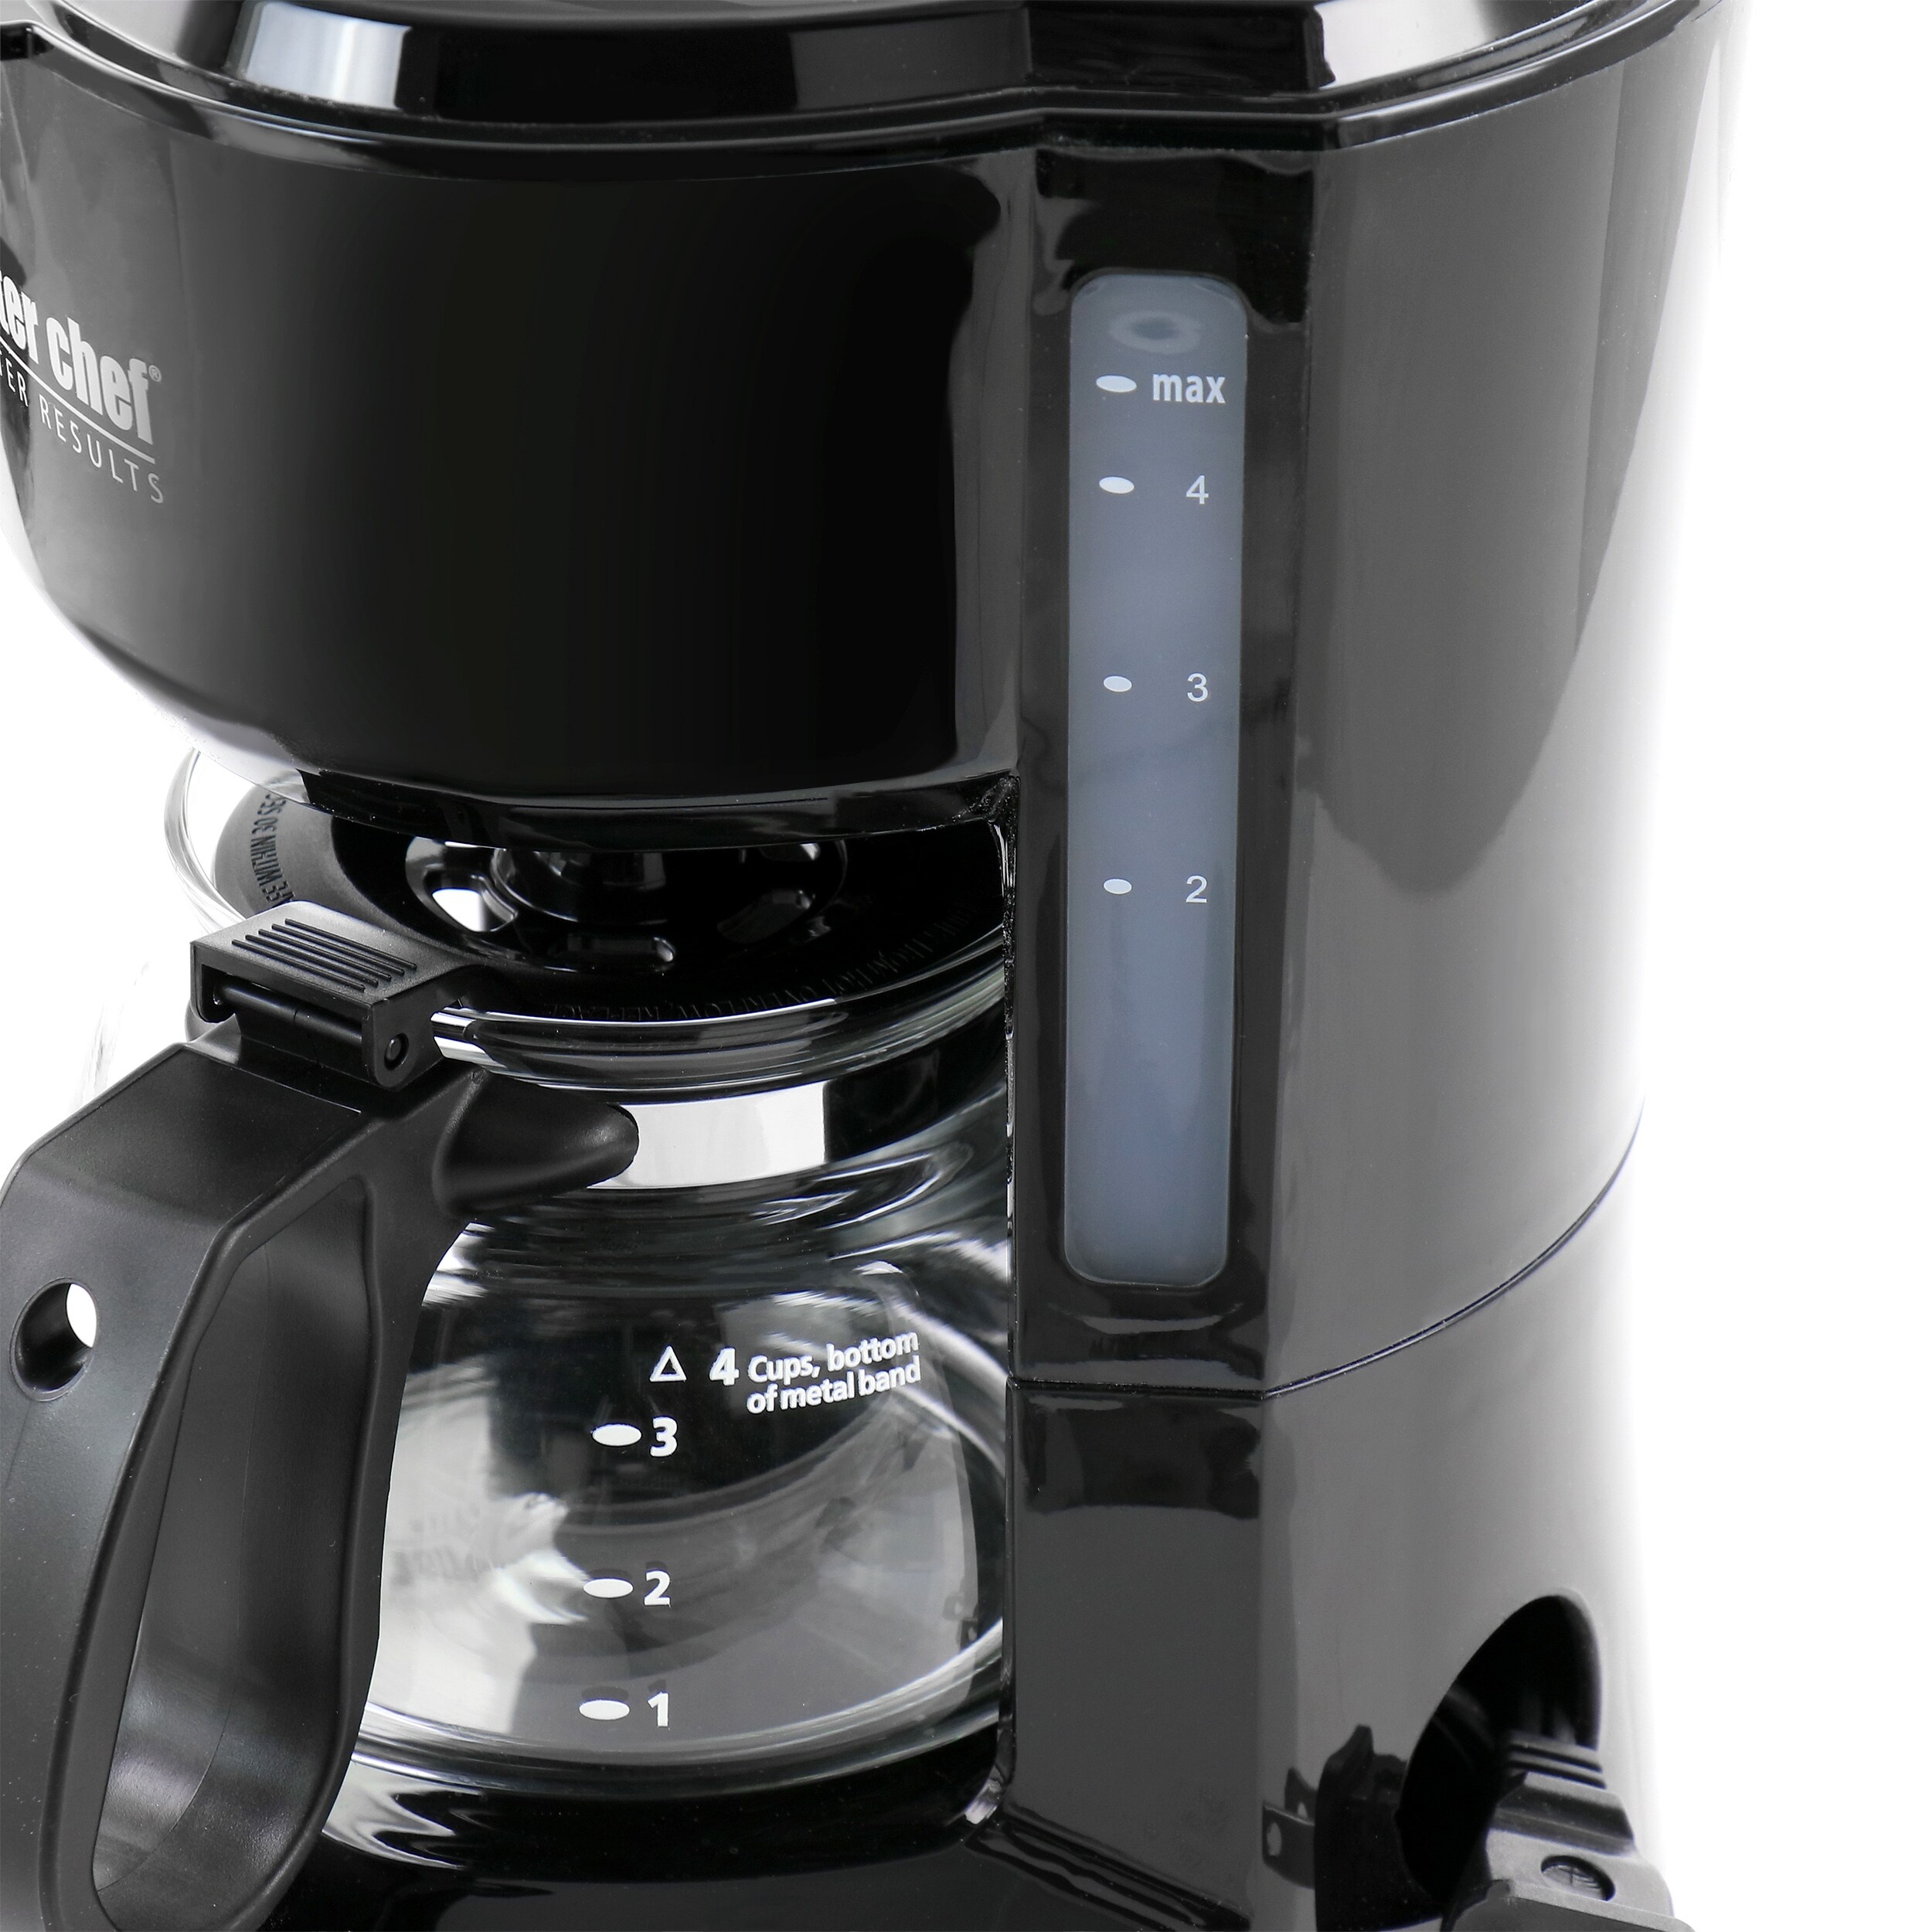 Better Chef 4 Cup Compact Coffee Maker - 4 Cups - On Sale - Bed